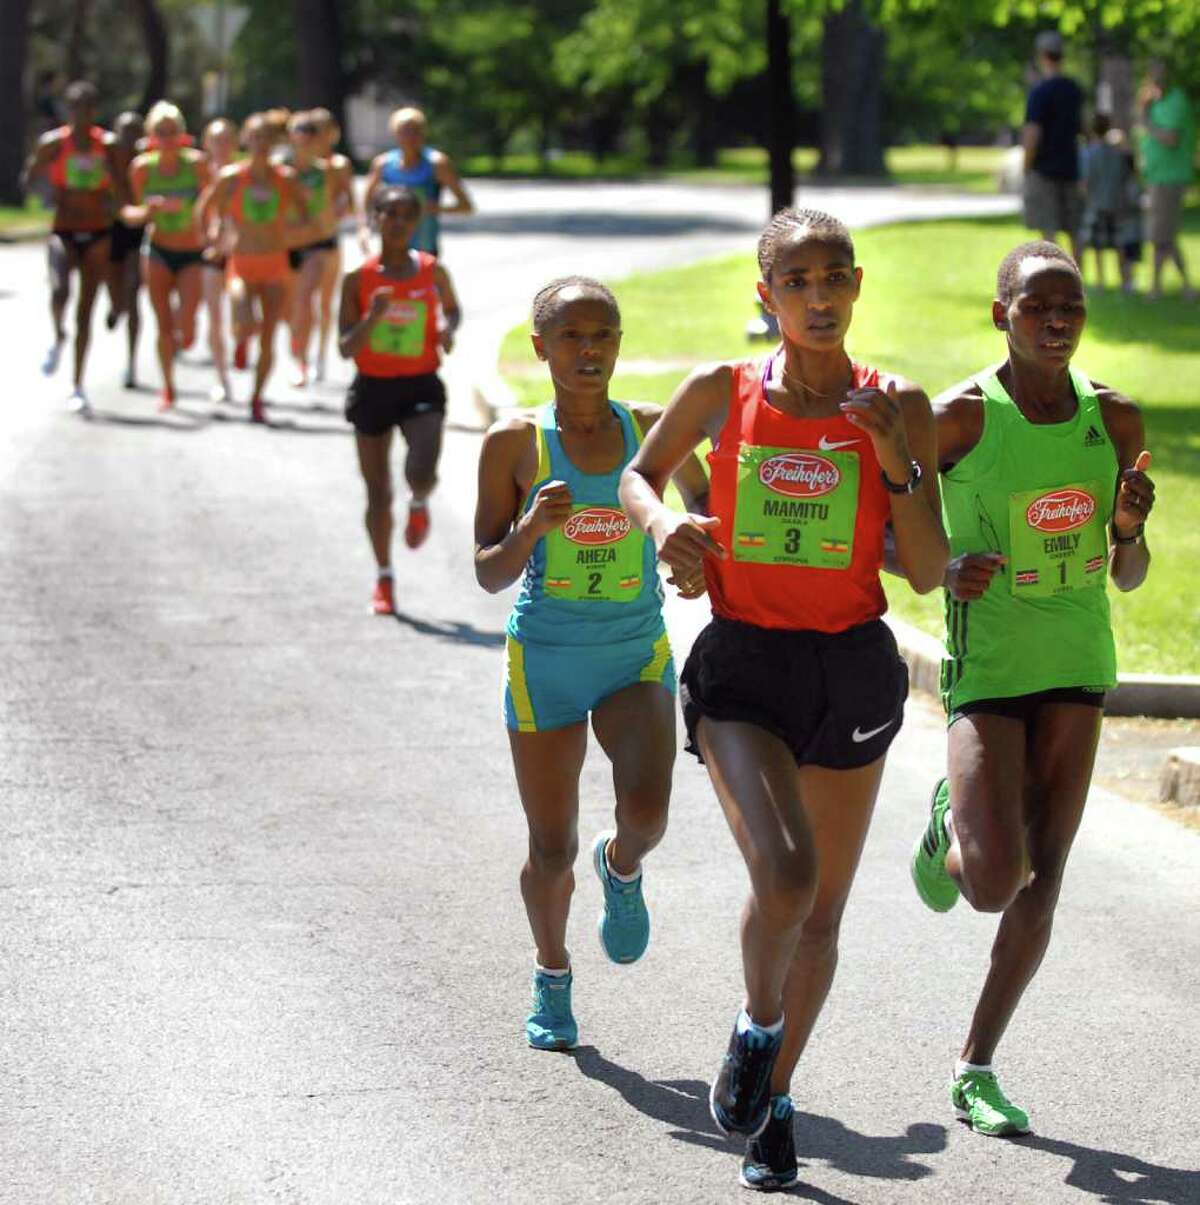 Mamitu Daska (3) of Ethiopia runs in the lead, followed by Emily Chebet (1) and Aheza Kiros (2) in Washington Park during Freihofer's 33rd Run for Women on Saturday, June 4, 2011, in Albany, N.Y. (Cindy Schultz / Times Union)